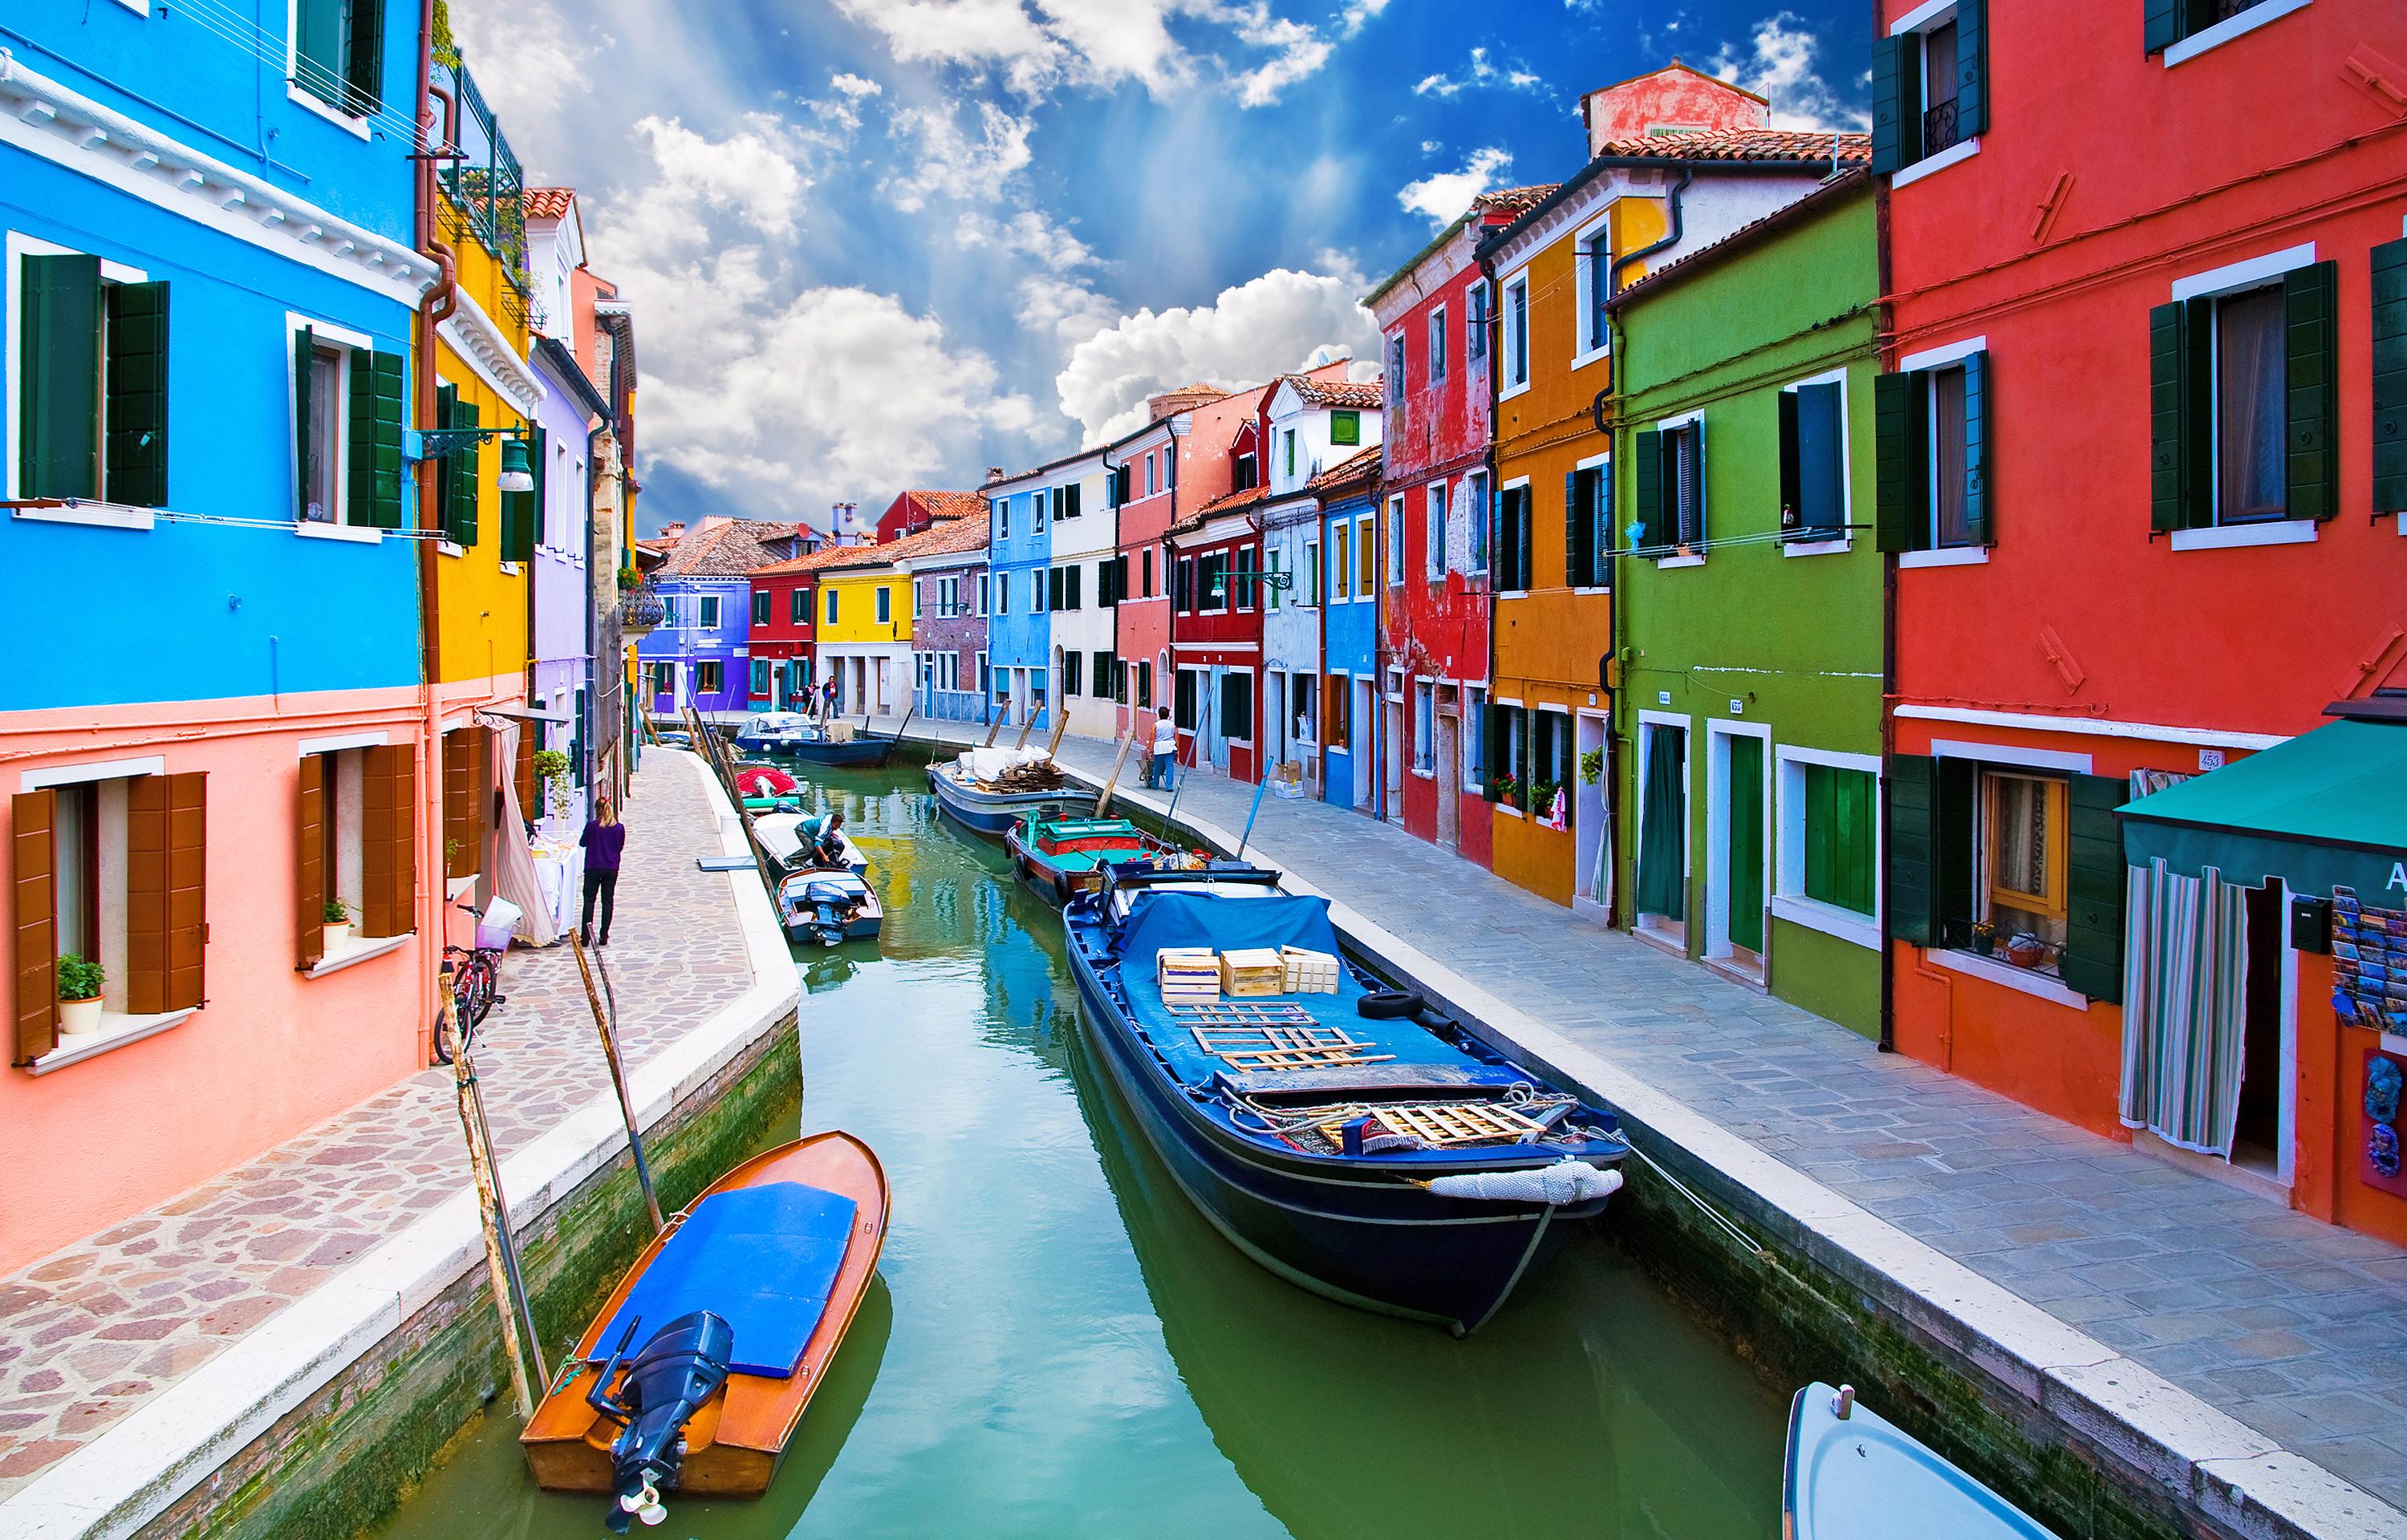 Visit a glass blowing workshop in Murano and a lace workshop in Burano - In English